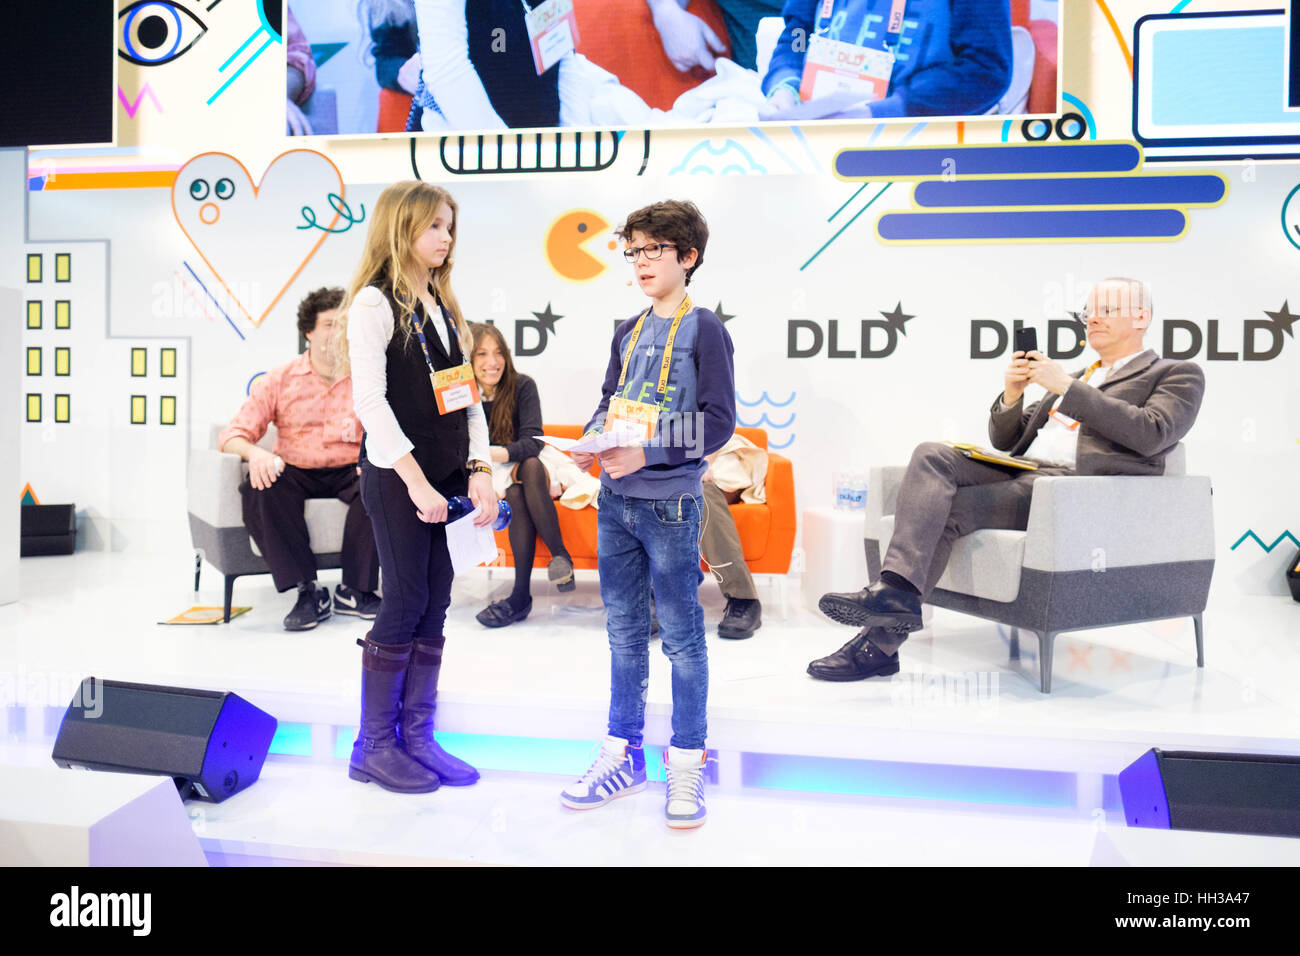 Munich, Germany. 16th January 2017. JAMIAN JULIANO-VILLANI and BILLY GRANT during he DLD17 (Digital-Life-Design) Conference at the Alte Bayerische Staatsbank on January 16, 2017 in Munich, Germany. DLD is Europe's big conference of innovation, digitization, scien | usage worldwide Stock Photo